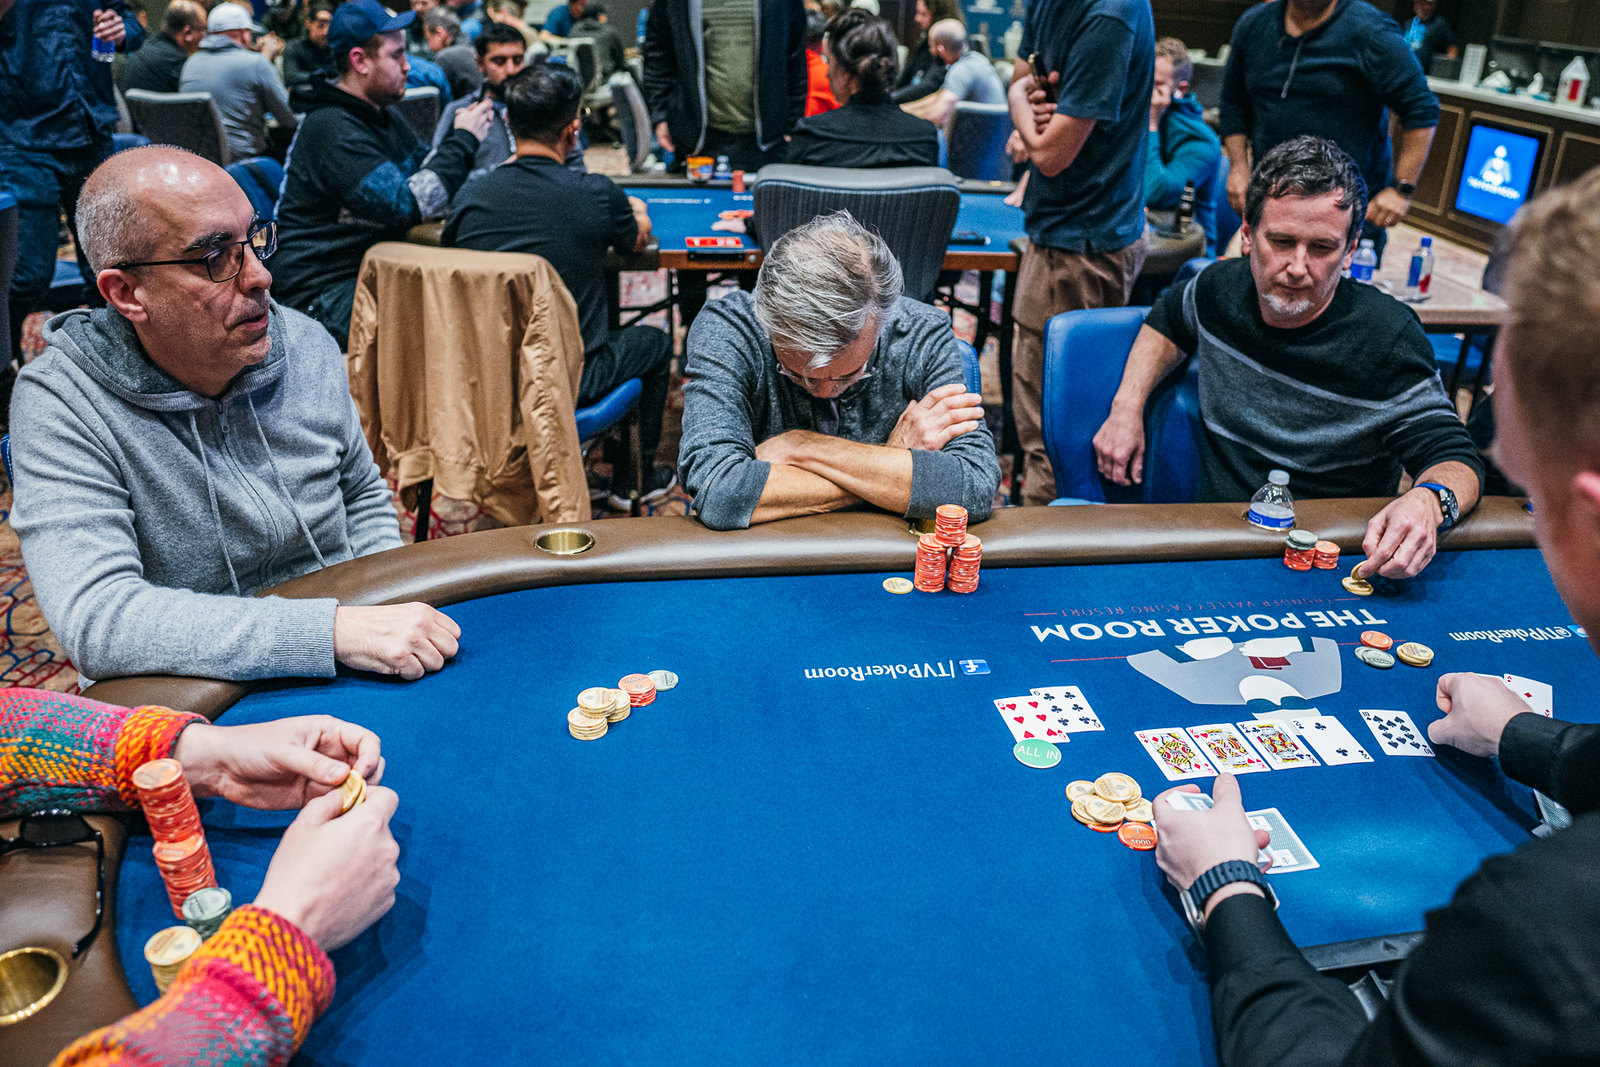 Defending Champ Out, But Big Names Remain After Day 2 at WPT Rolling Thunder